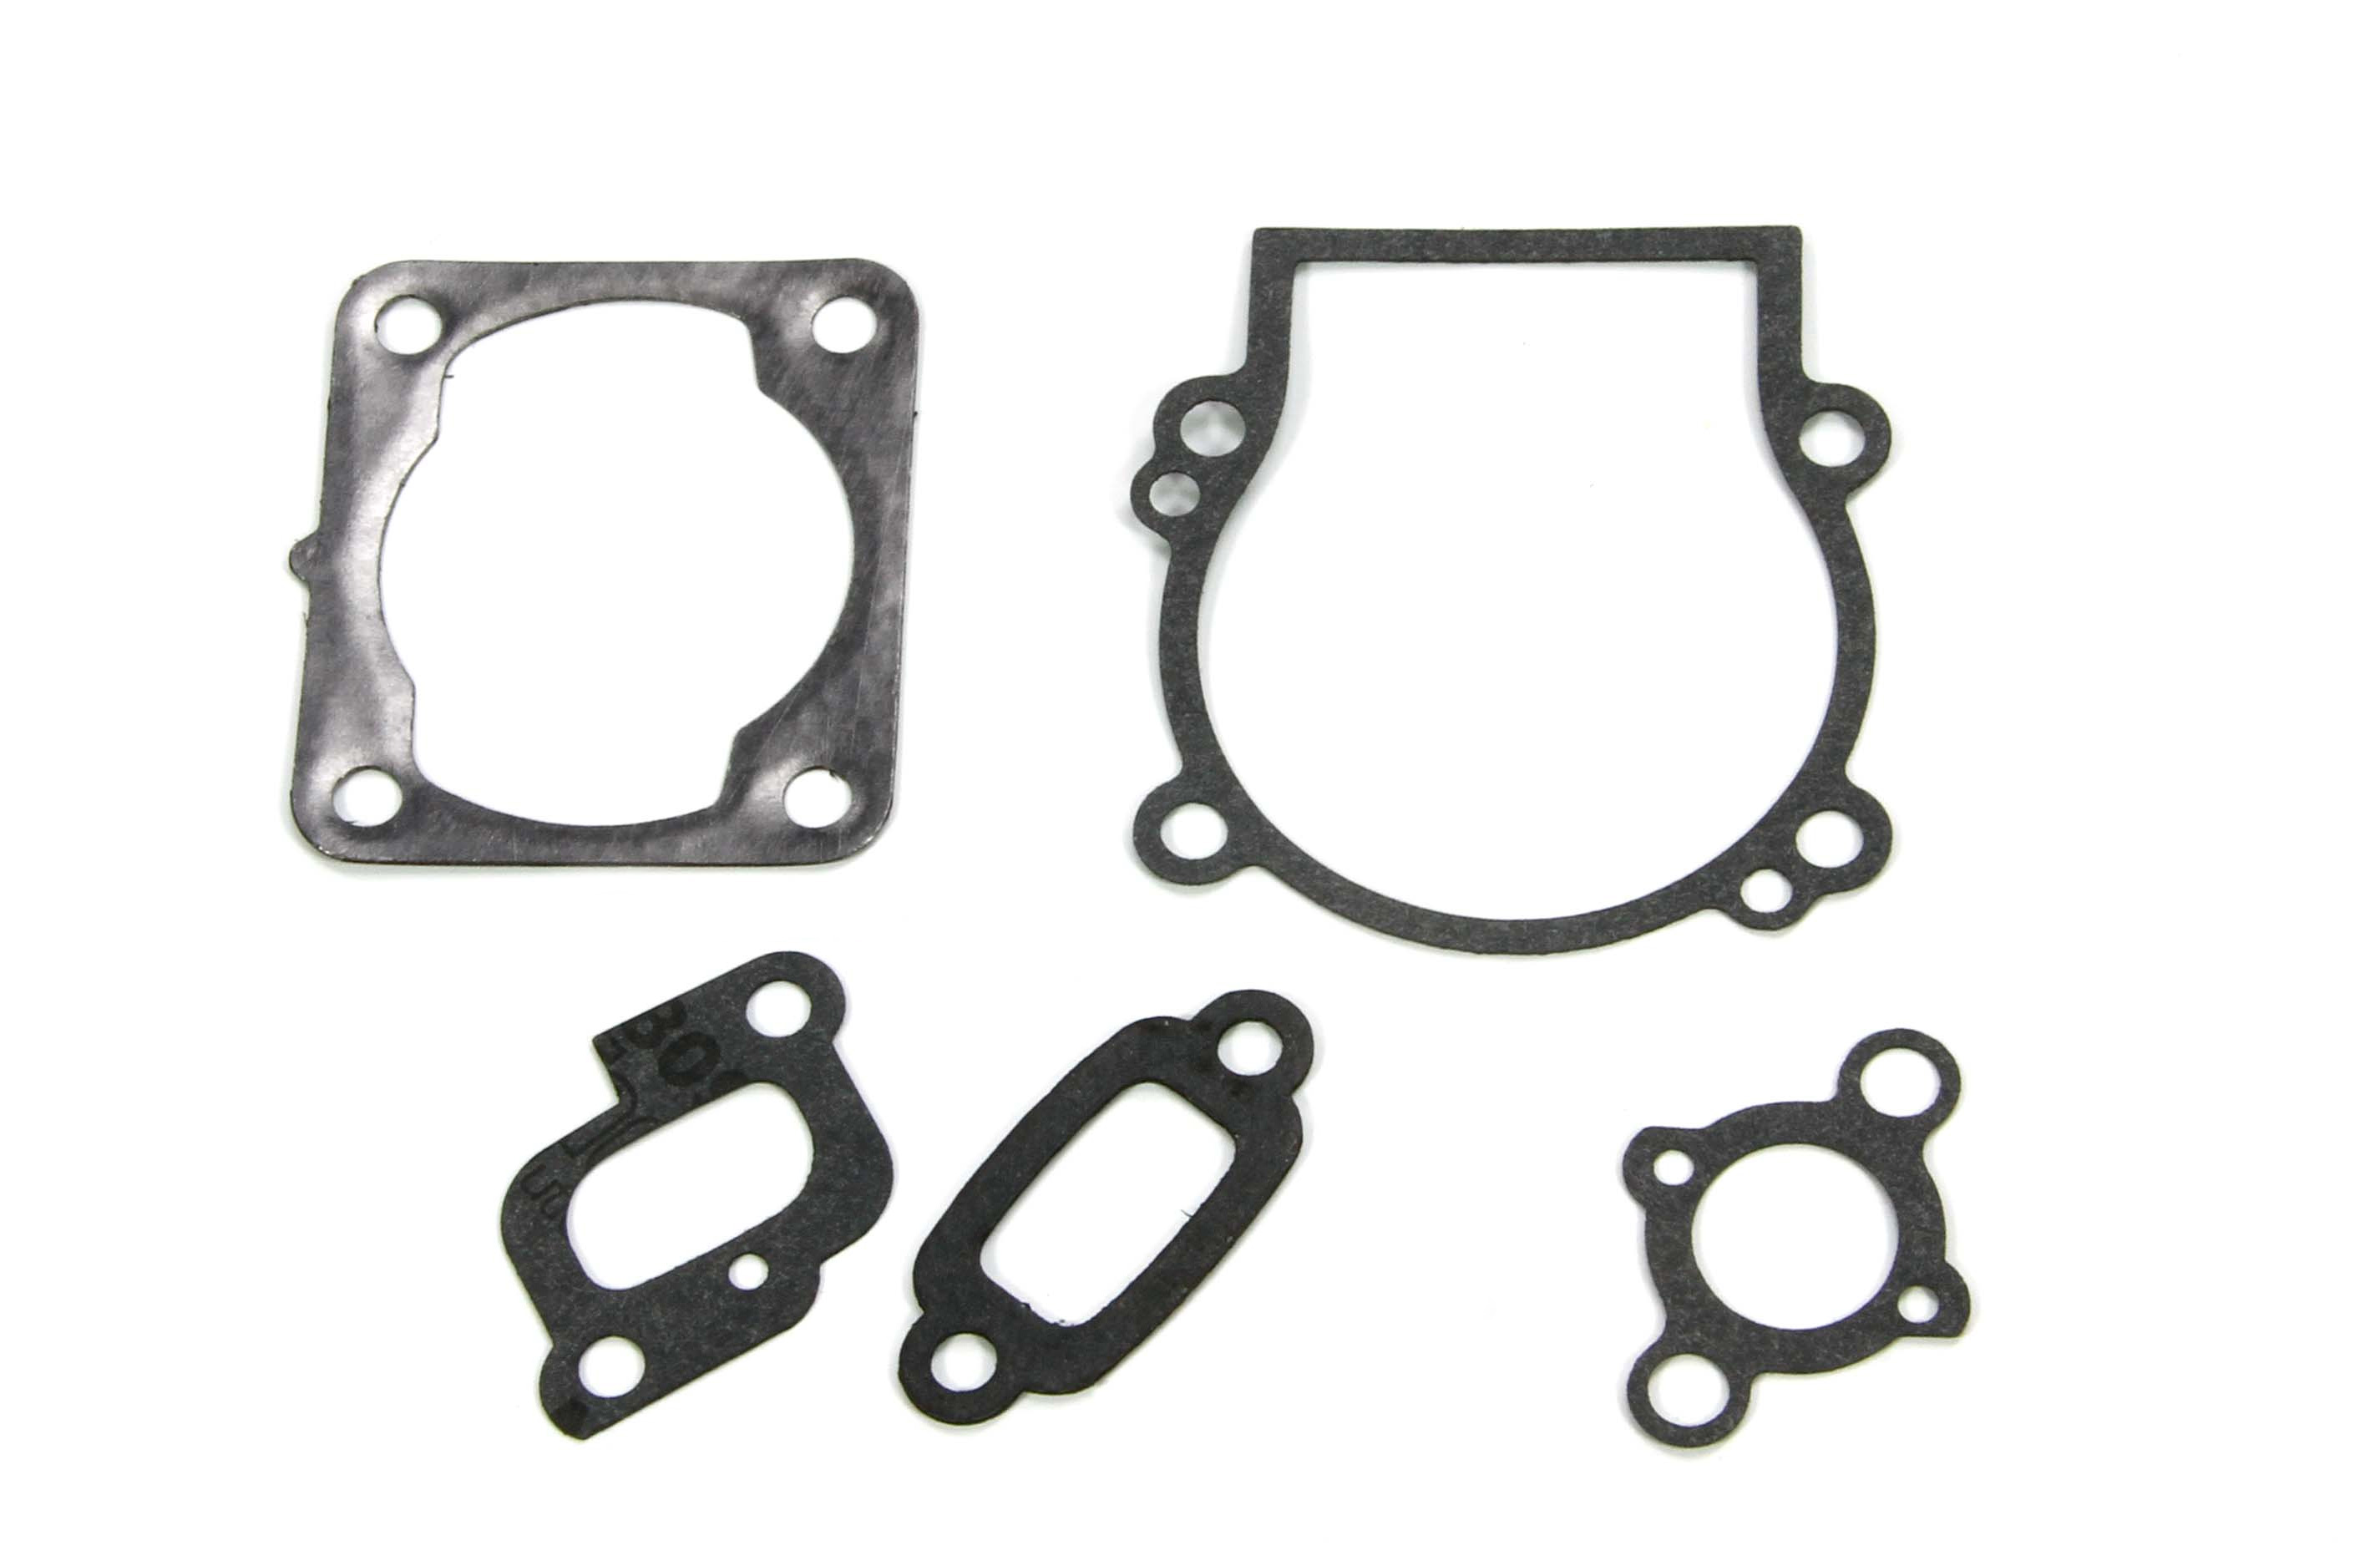 y1376 Full set of gaskets for Zenoah G240, G270, G290, and 4-Bolt CY engines